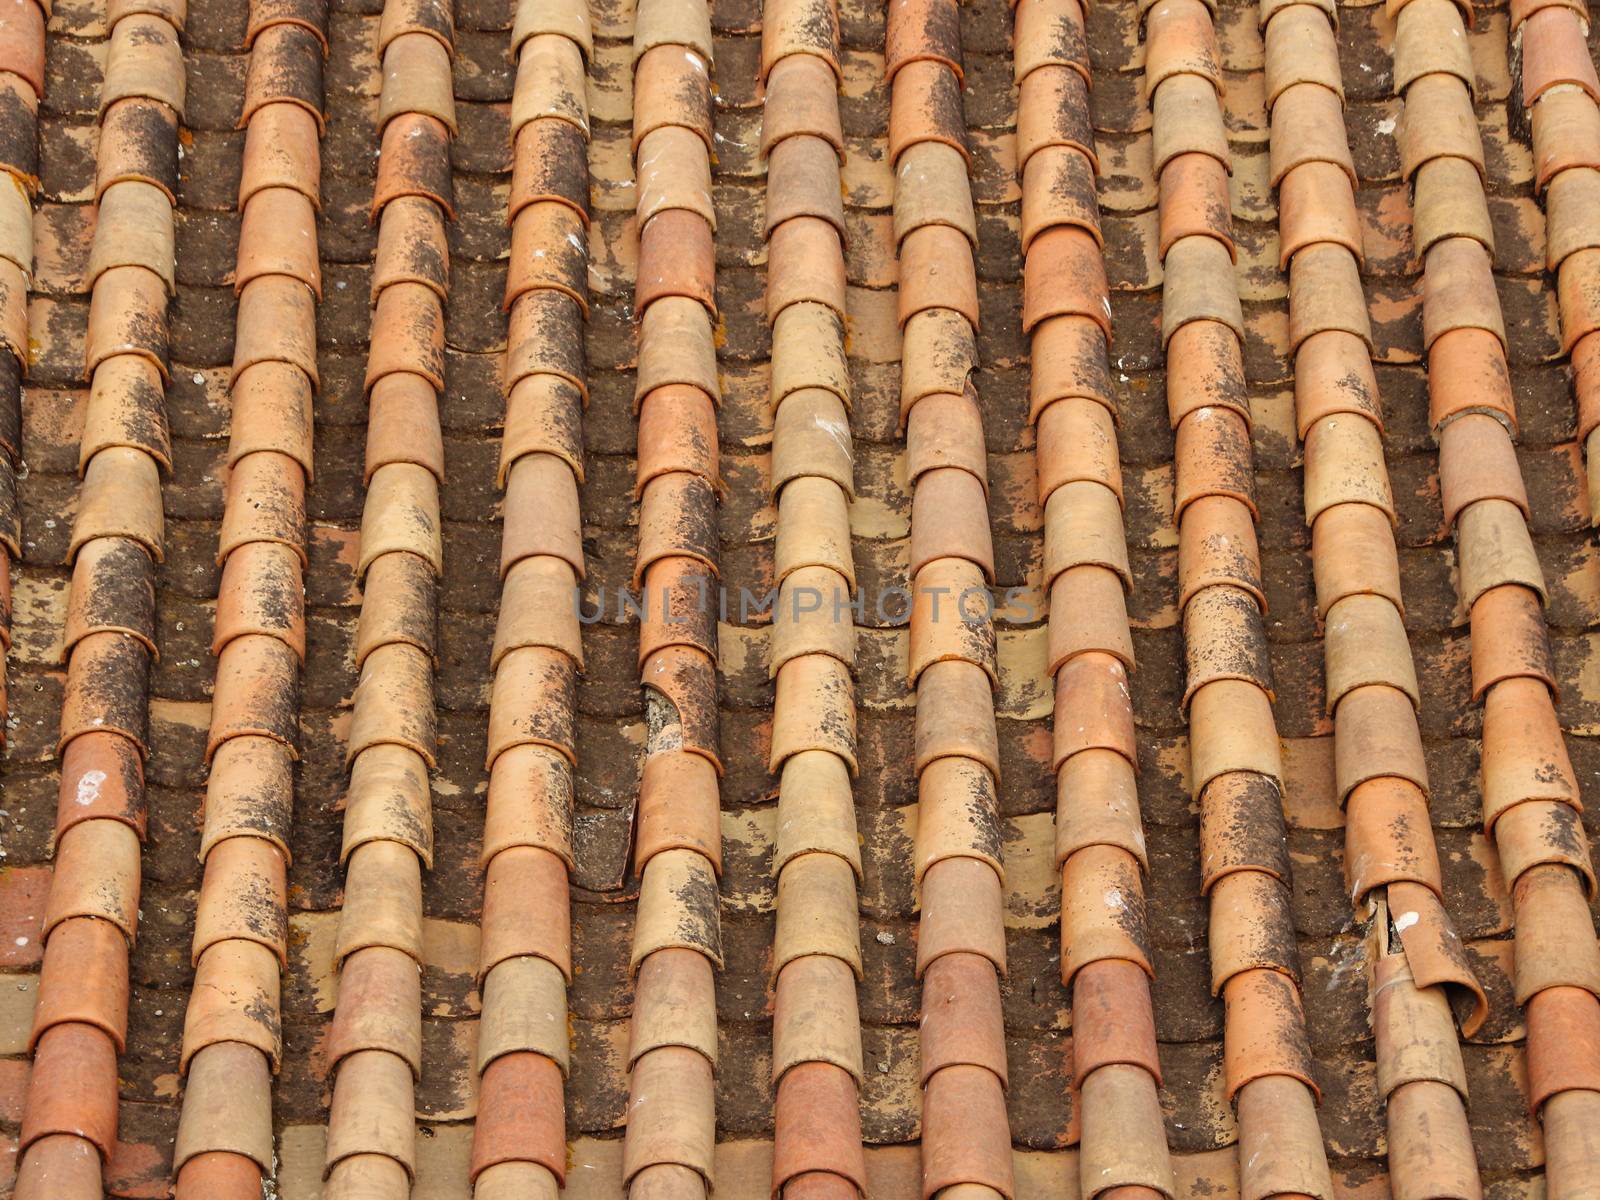 Old Tile Brick Roof Southern Europe in Warm Colors by HoleInTheBox